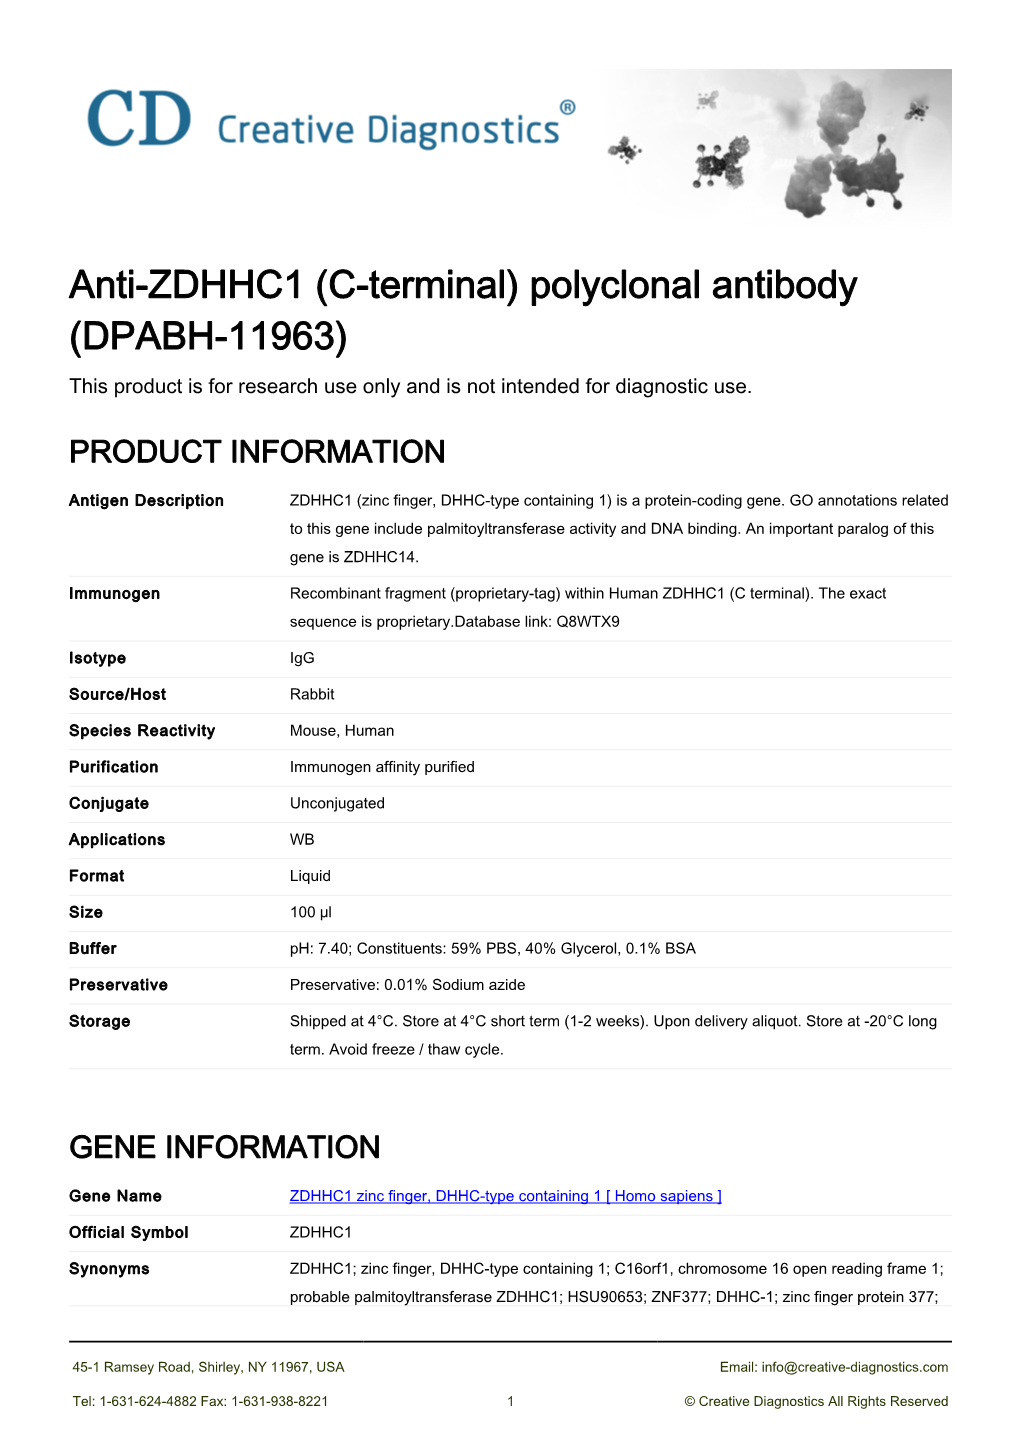 Anti-ZDHHC1 (C-Terminal) Polyclonal Antibody (DPABH-11963) This Product Is for Research Use Only and Is Not Intended for Diagnostic Use